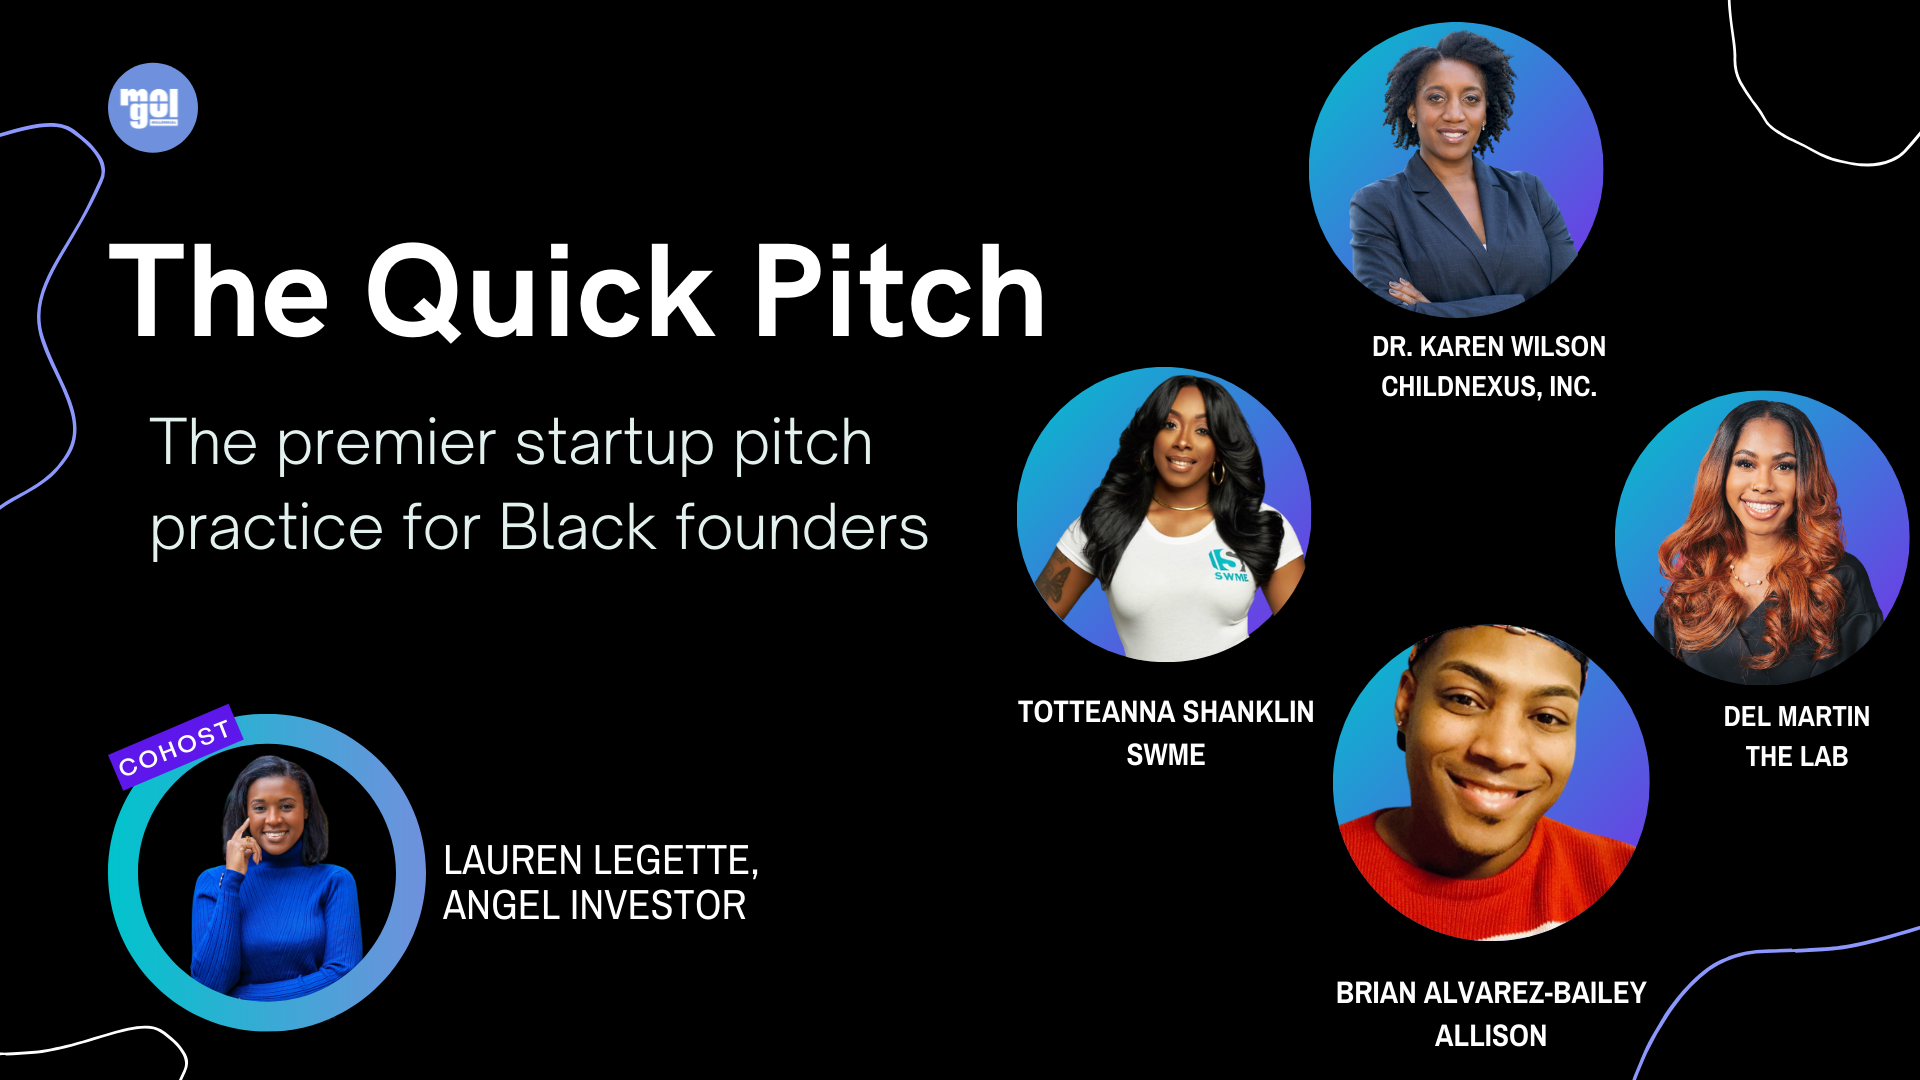 [Watch] 4 Black founders practice their pitch with Lauren Legette, Angel Investor and entrepreneur